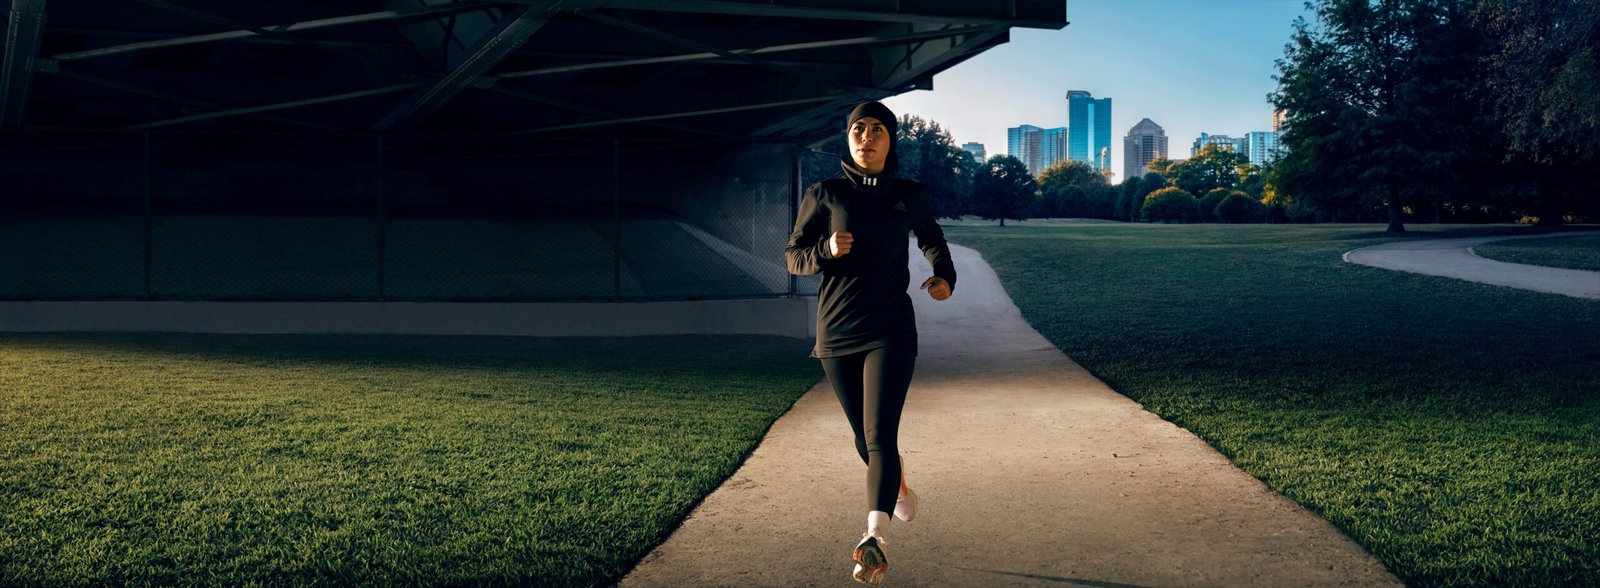  ADIDAS CREATES NEW POSSIBILITIES FOR WOMEN IN SPORT WITH ITS BIGGEST EVER COMMITMENT TO INNOVATION, ATHLETES AND FUTURE GENERATIONS​